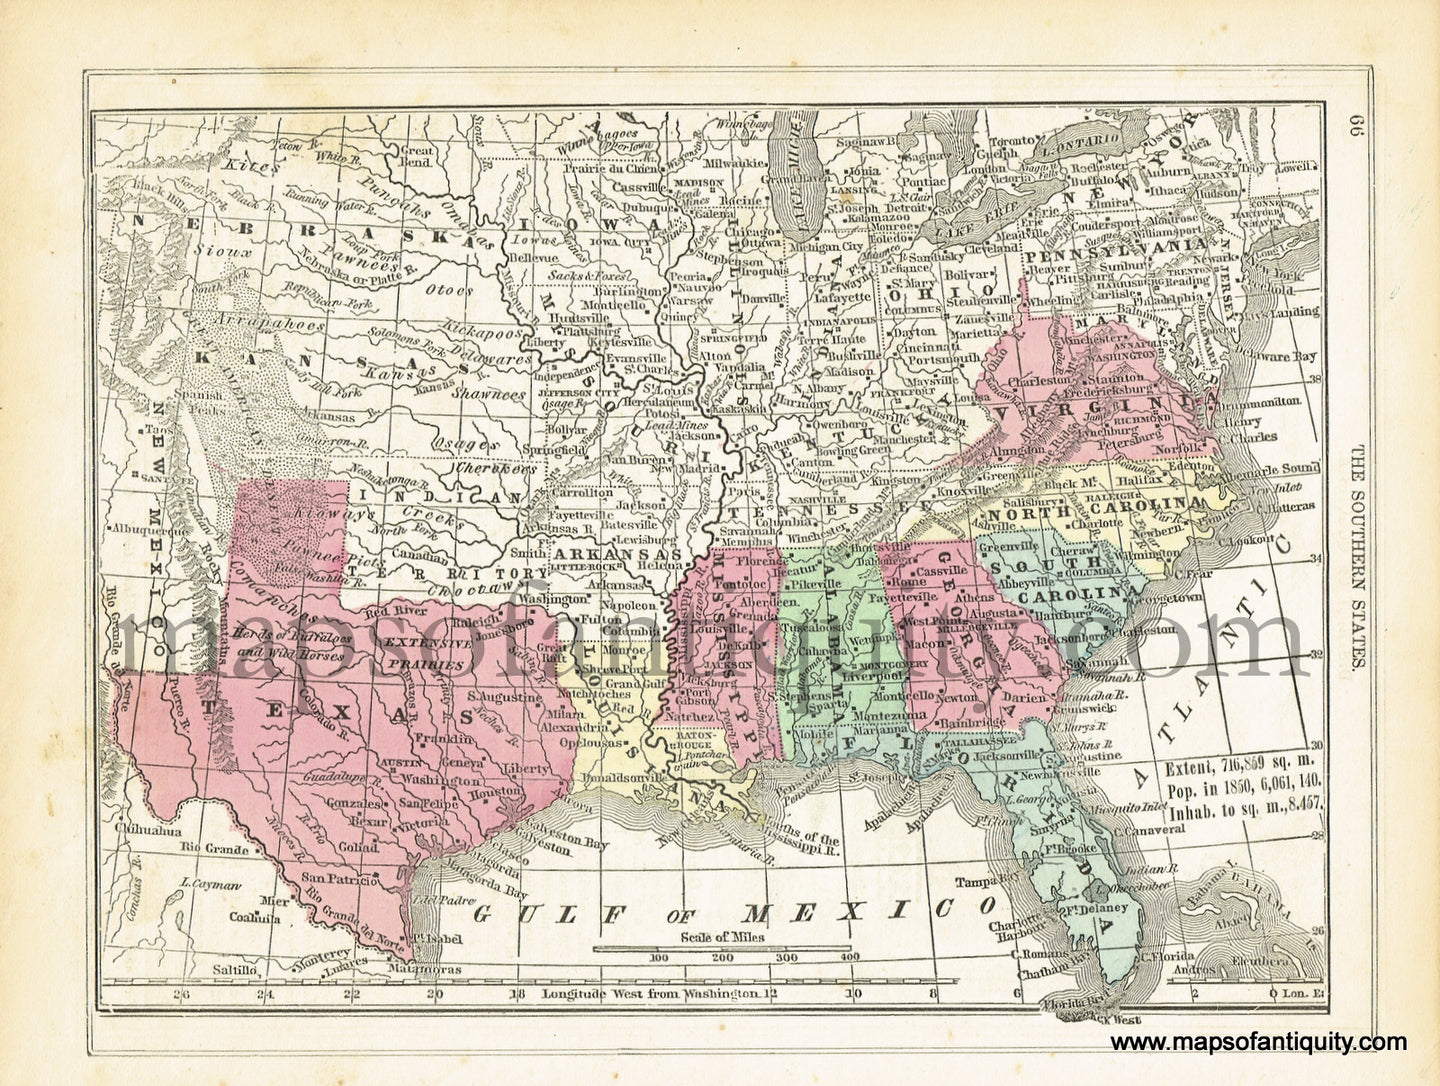 Antique-Hand-Colored-Map-The-Southern-States-United-States-South-1855-School-Geography-Maps-Of-Antiquity